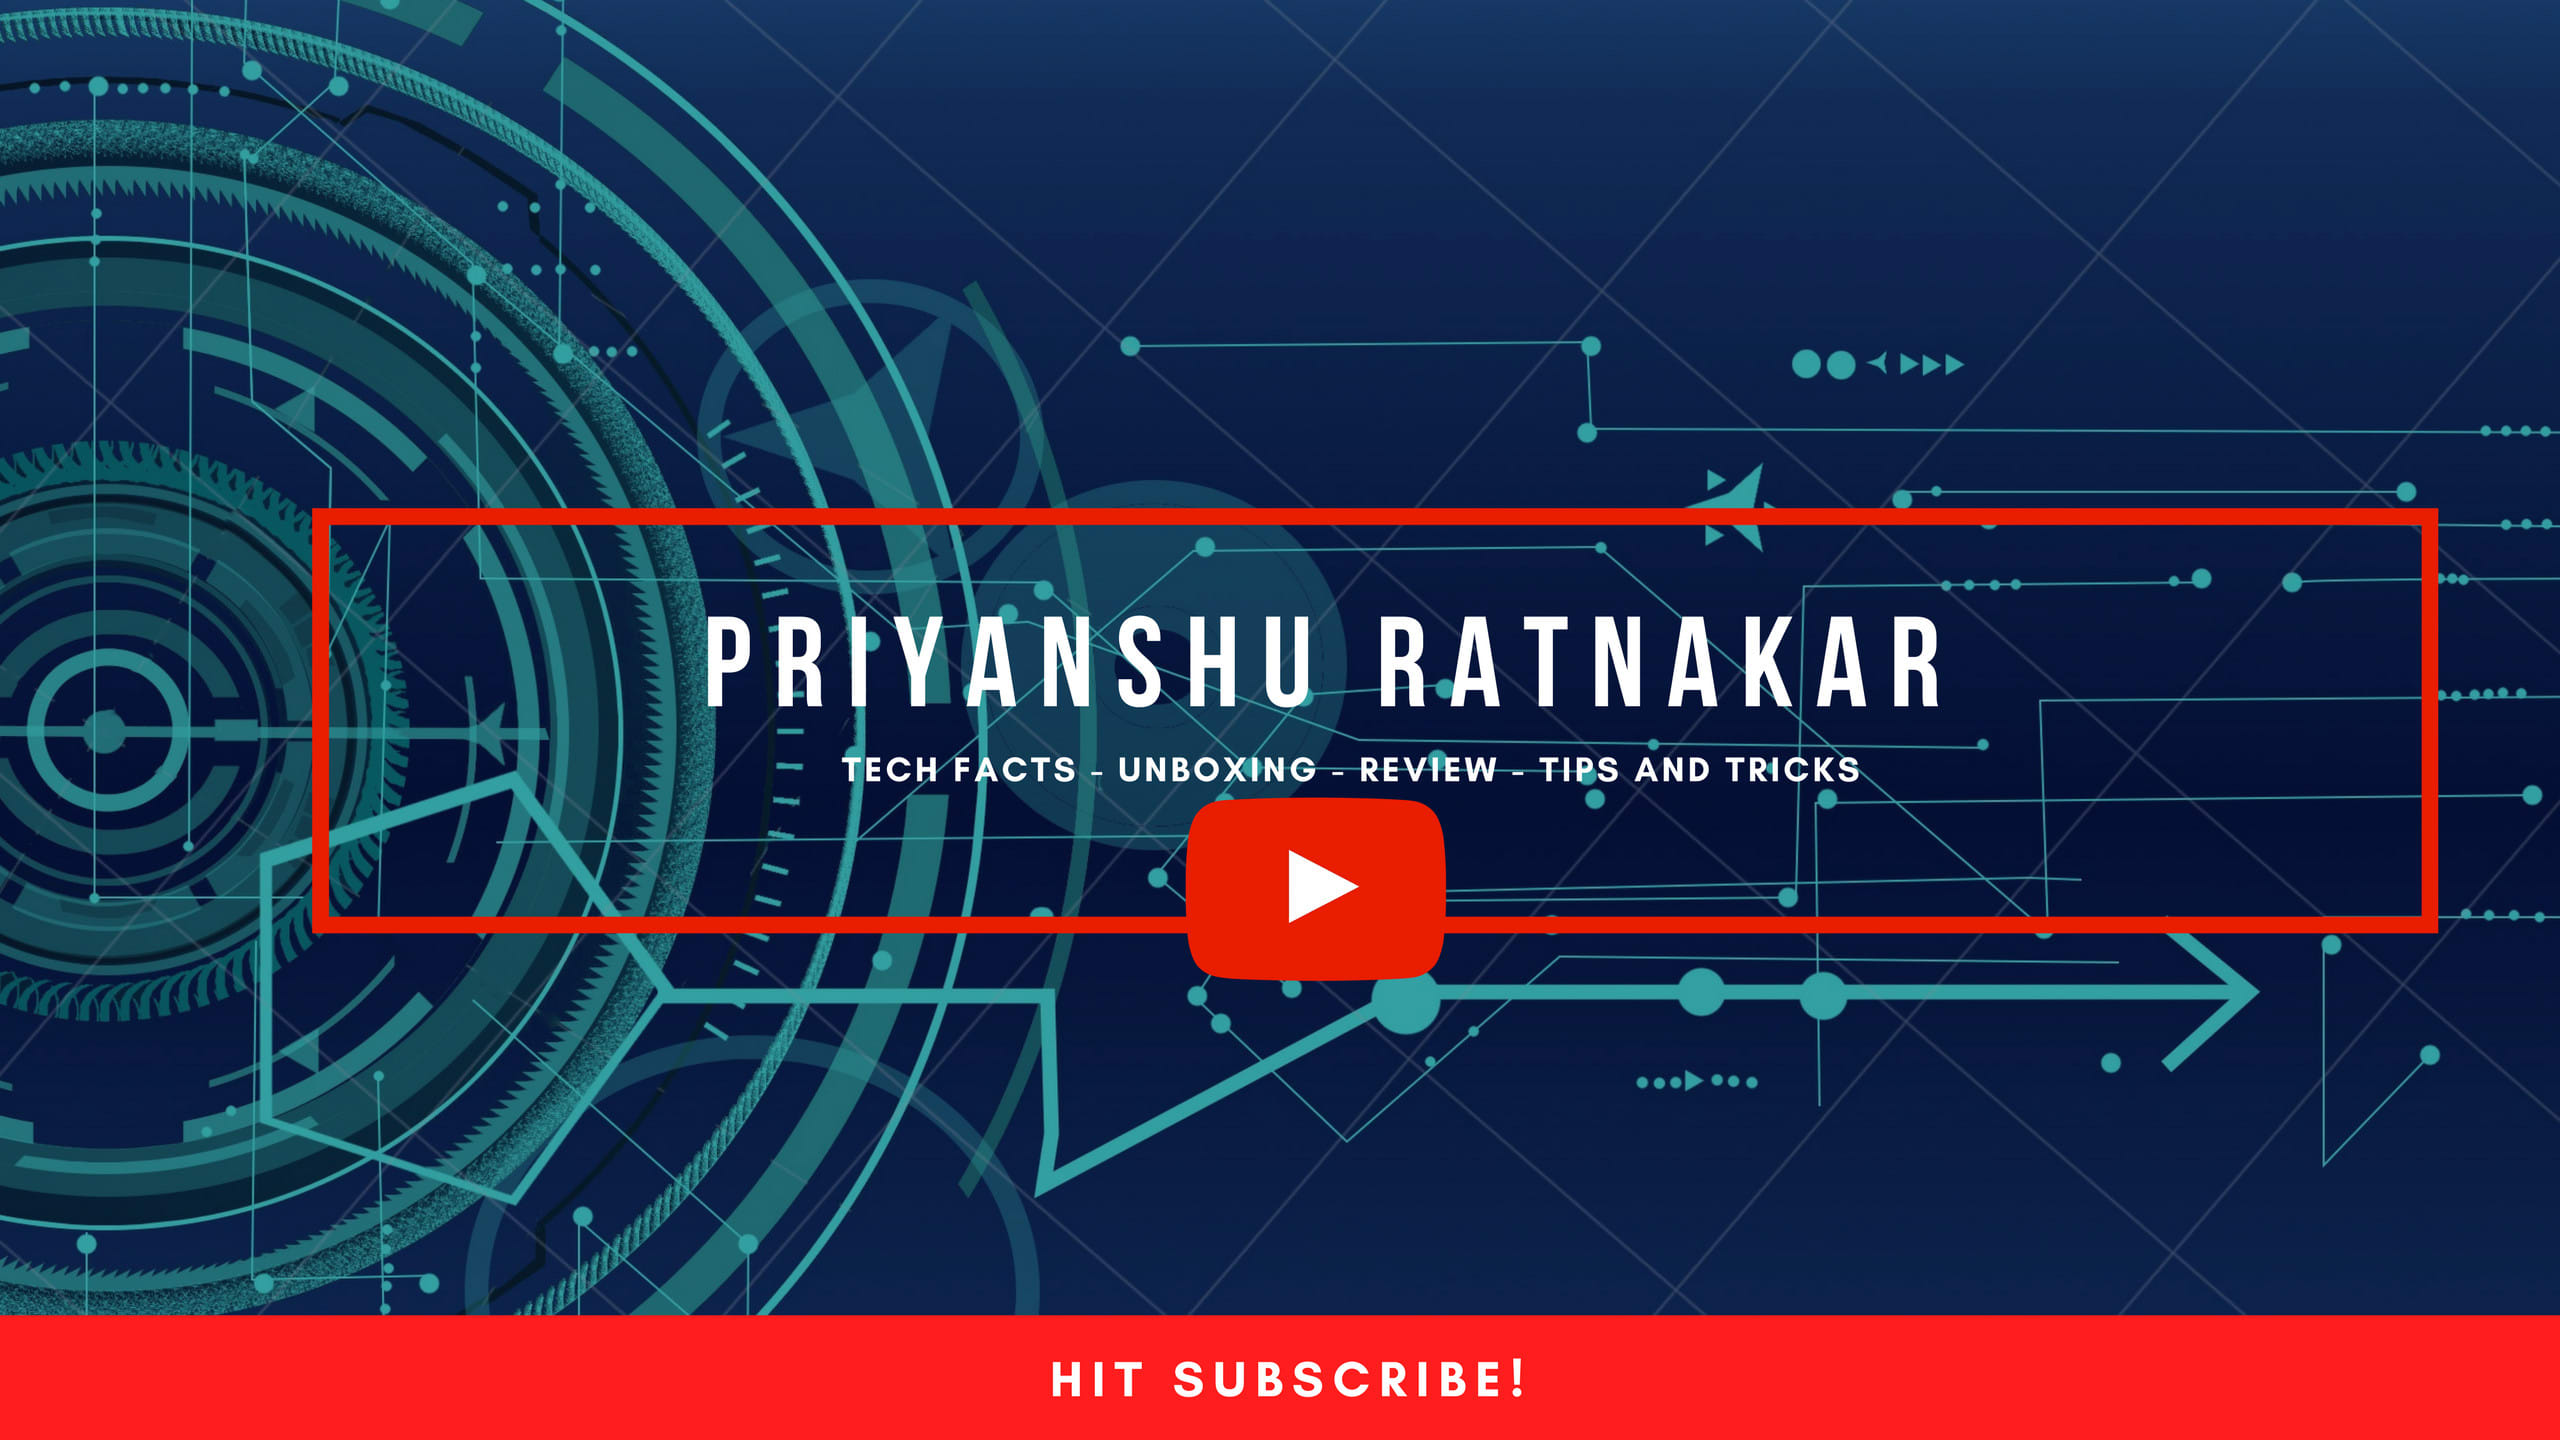 Design Awesome Youtube Channel Art Cover Banner By Priyanshuratnak